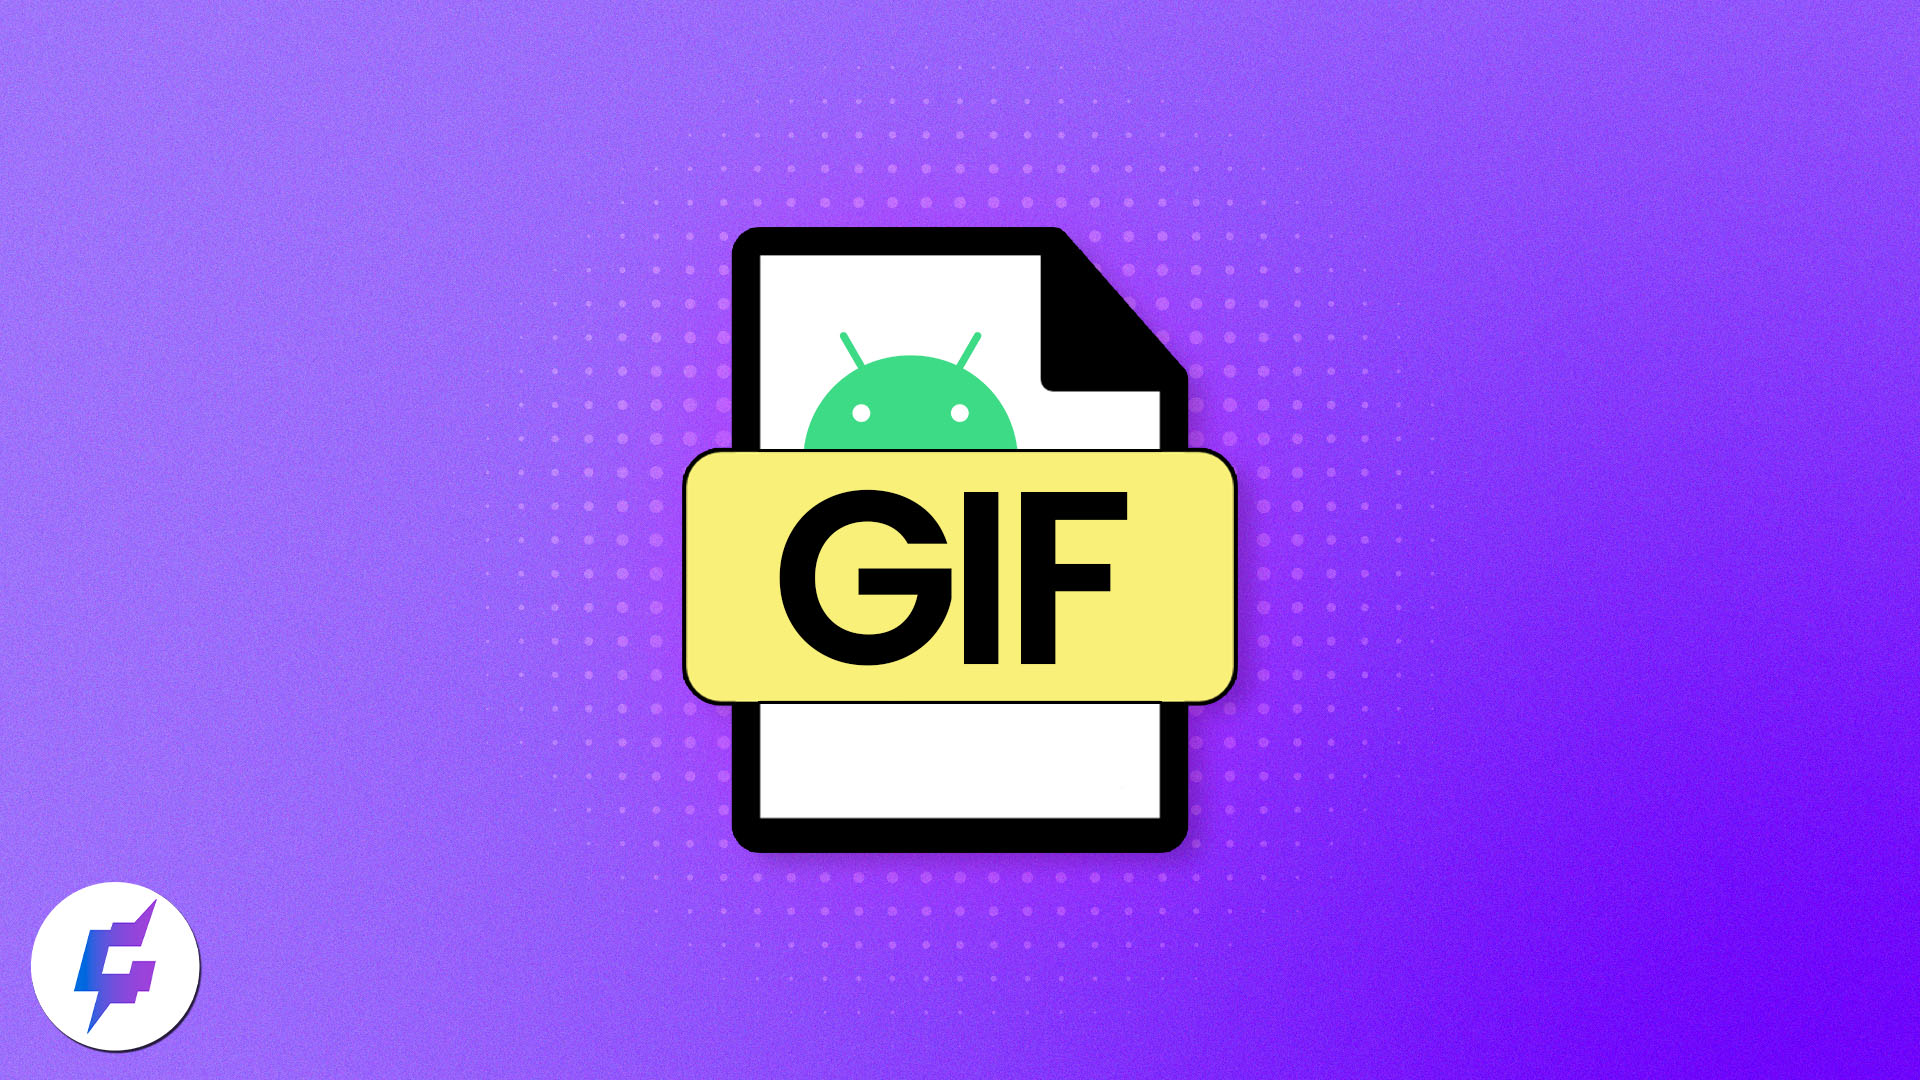 How to make a gif on Android